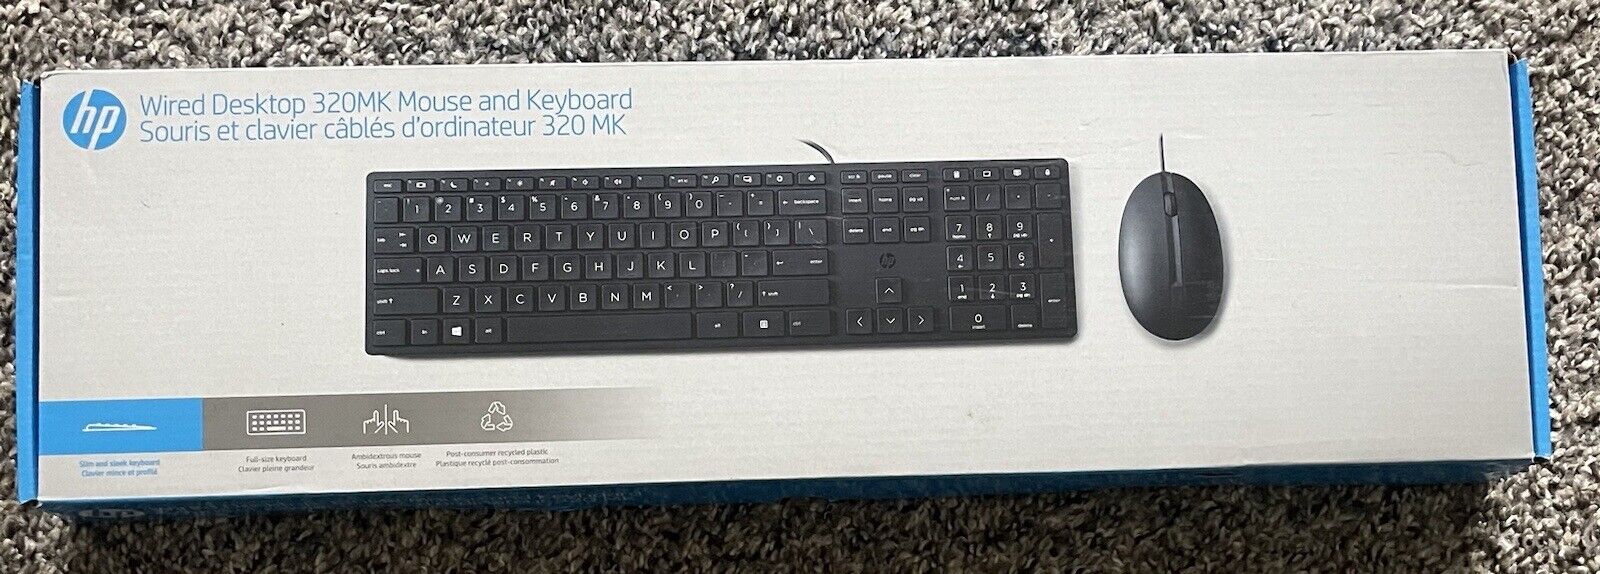 HP Wired Desktop 320MK Mouse and Keyboard,USB (9SR36UT#ABA) 